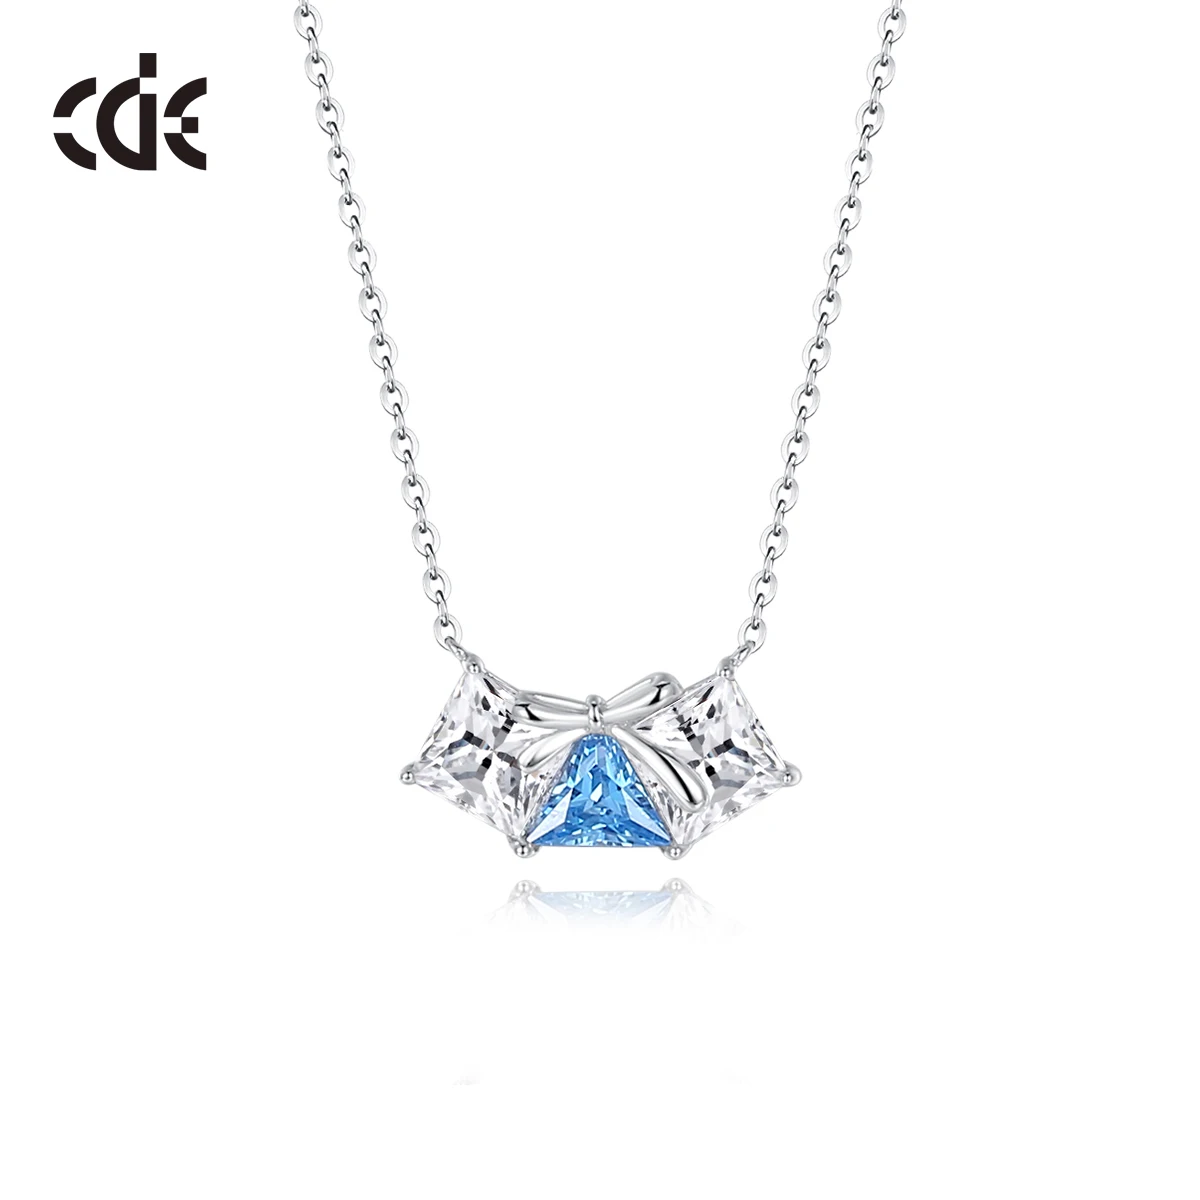 CDE WYN22 Fine Jewelry 925 Sterling Silver Necklace Multi Color Zircon Pendant Women Crafted Bow Tie Pendant Necklace